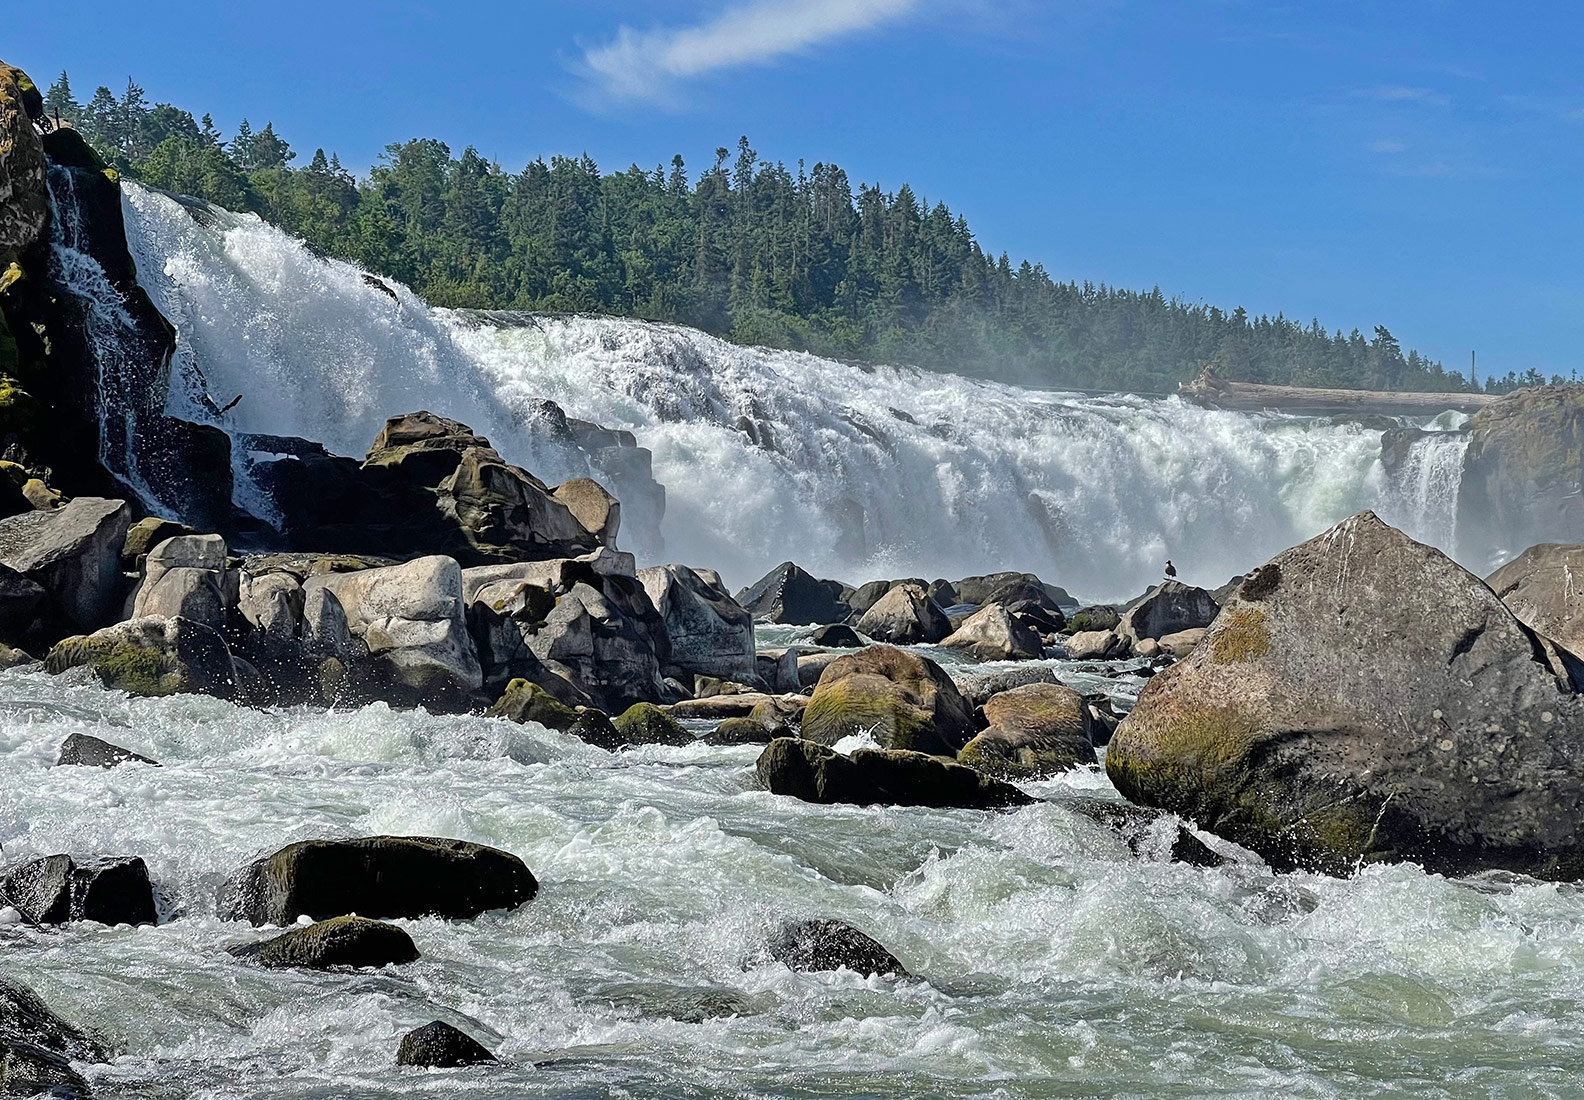 Confederated Tribes of Grand Ronde receives grant for Willamette Falls environmental restoration